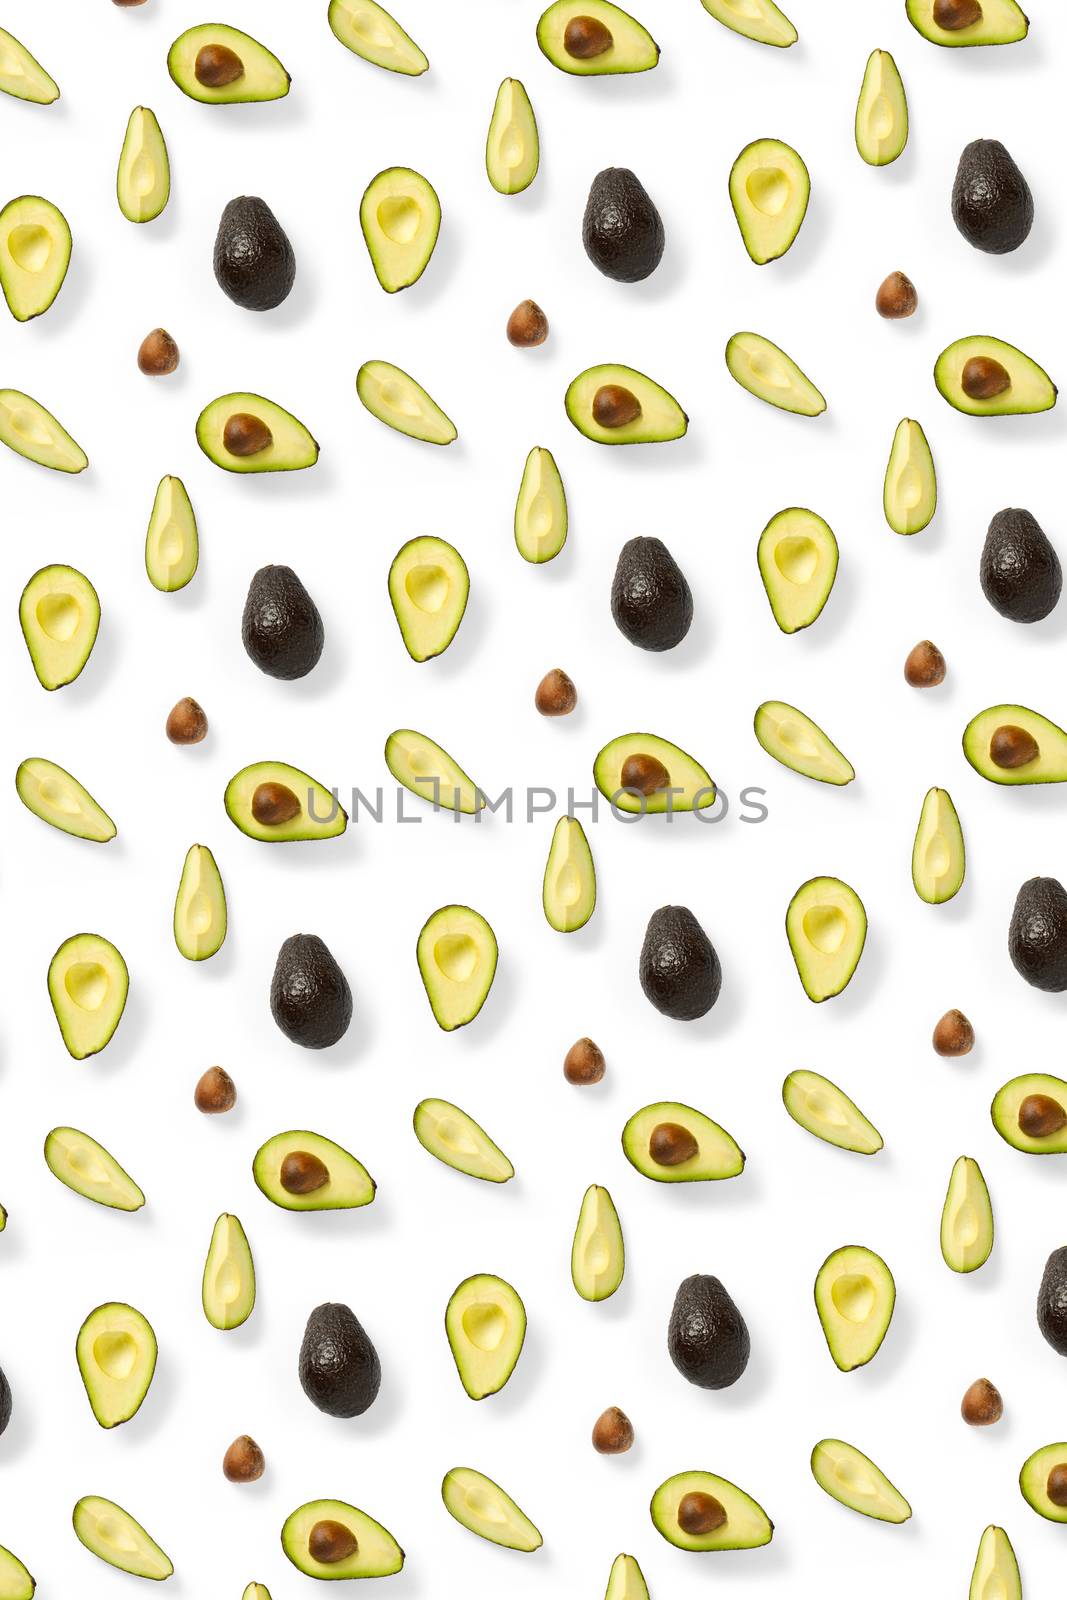 Avocado. Background made from isolated Avocado pieces on white background. Flat lay of fresh ripe avocados and avacado pieces